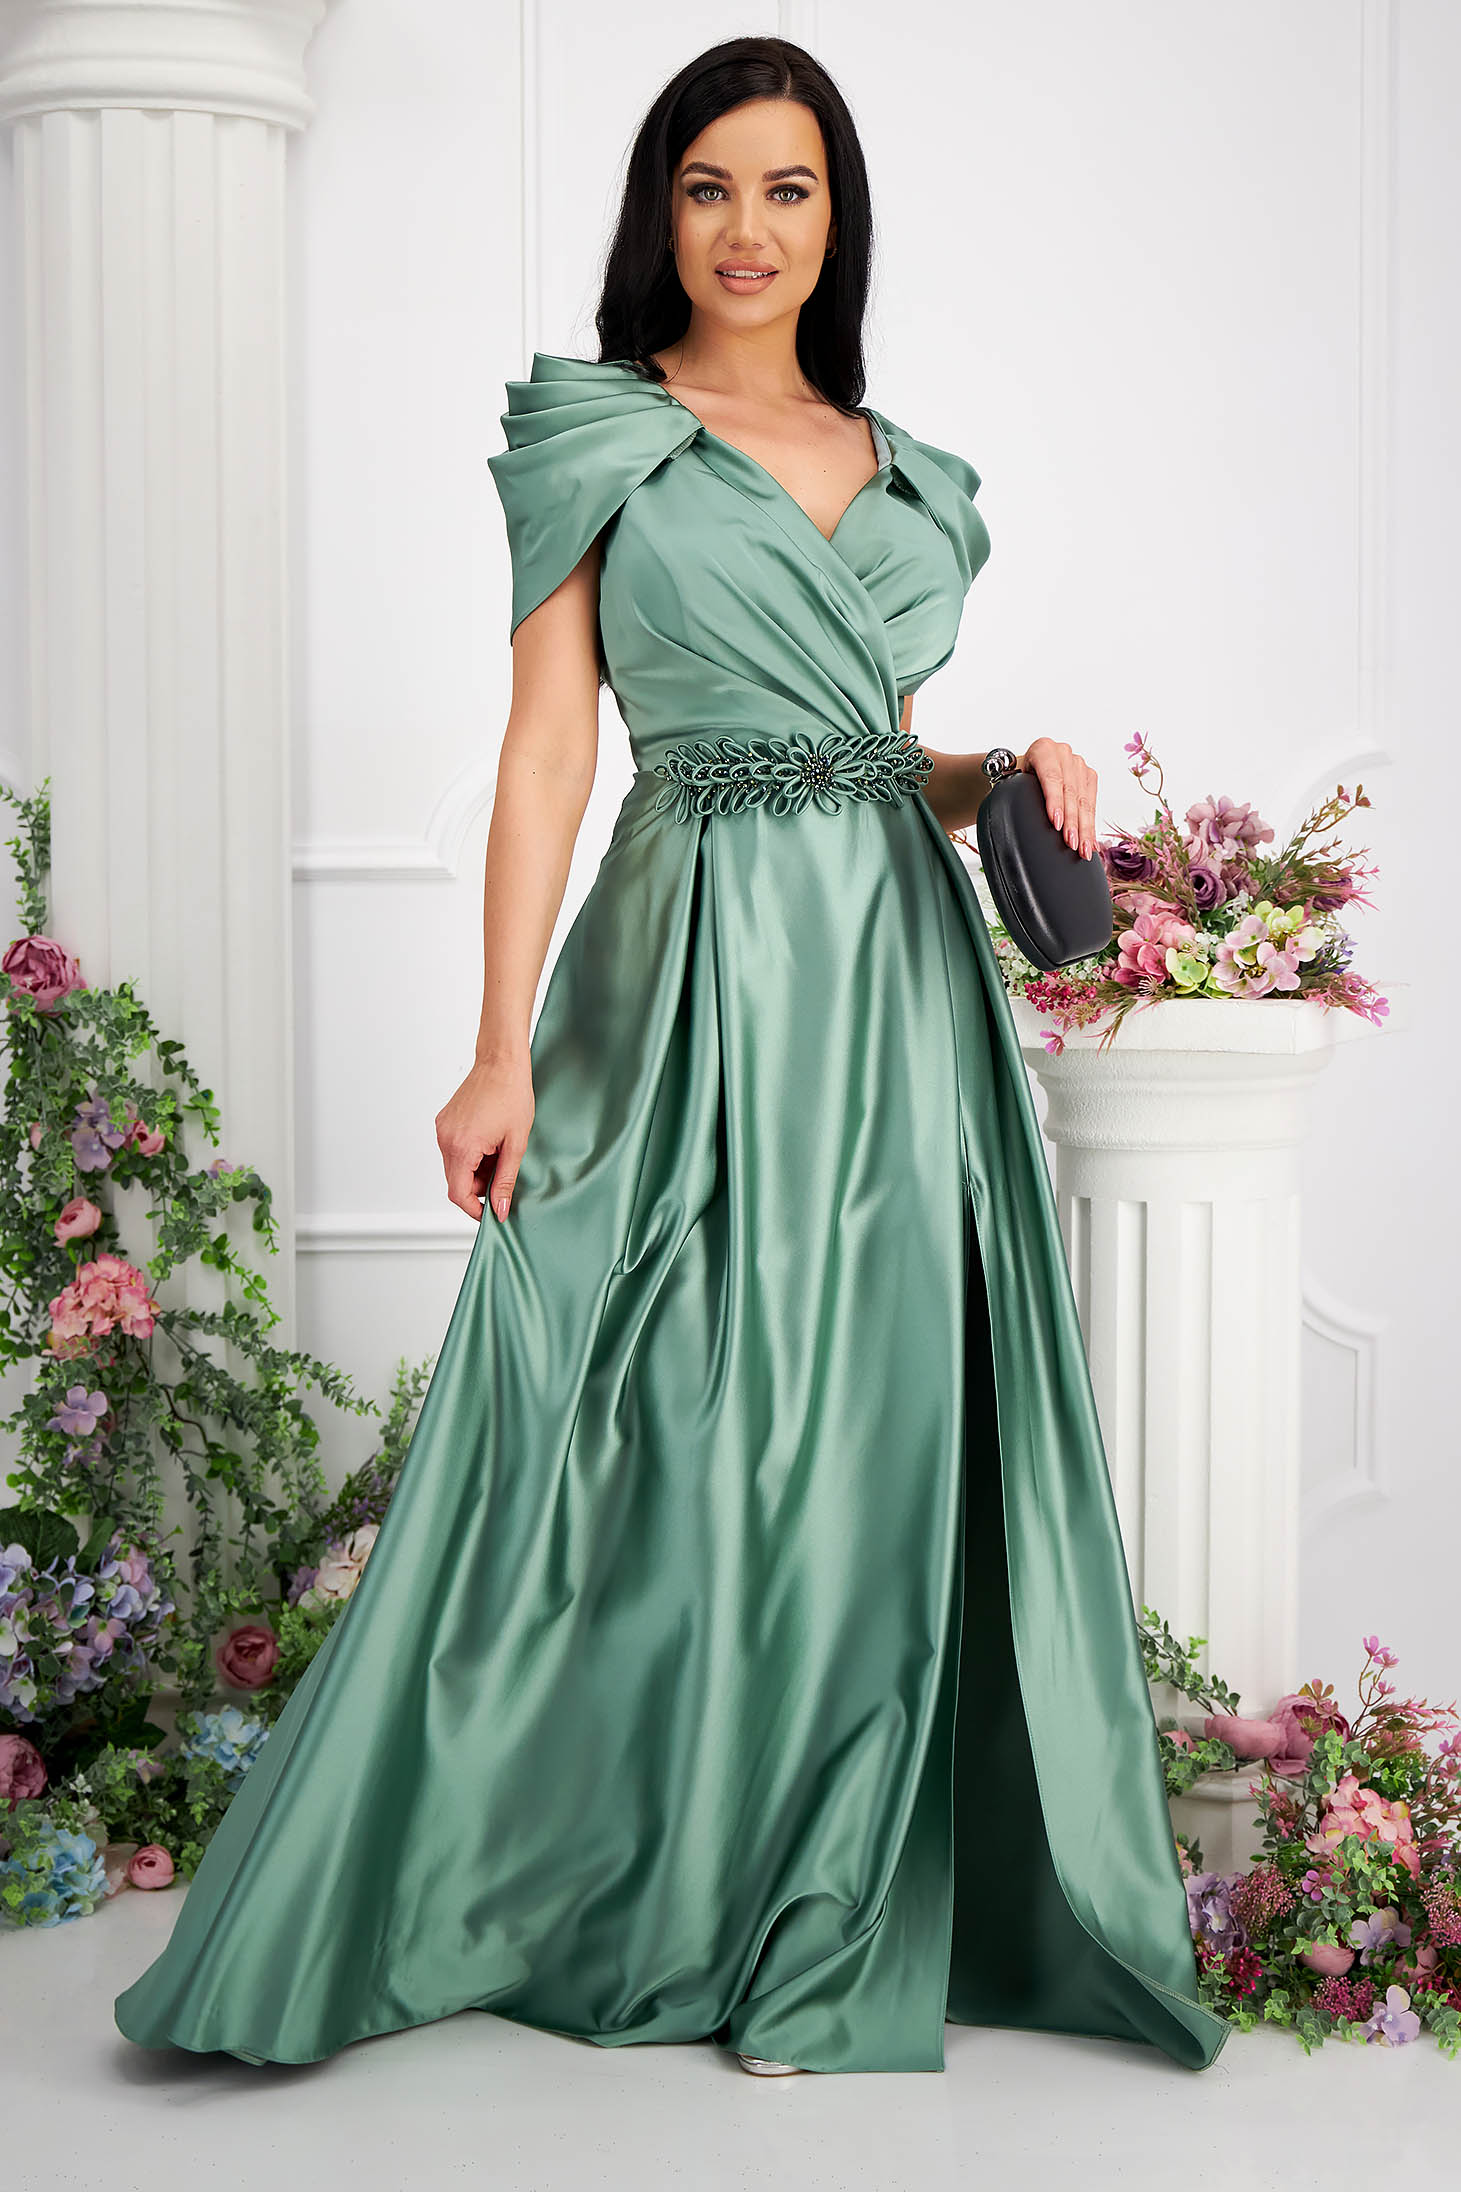 Green dress taffeta long cloche wrap over front with raised flowers 3 - StarShinerS.com